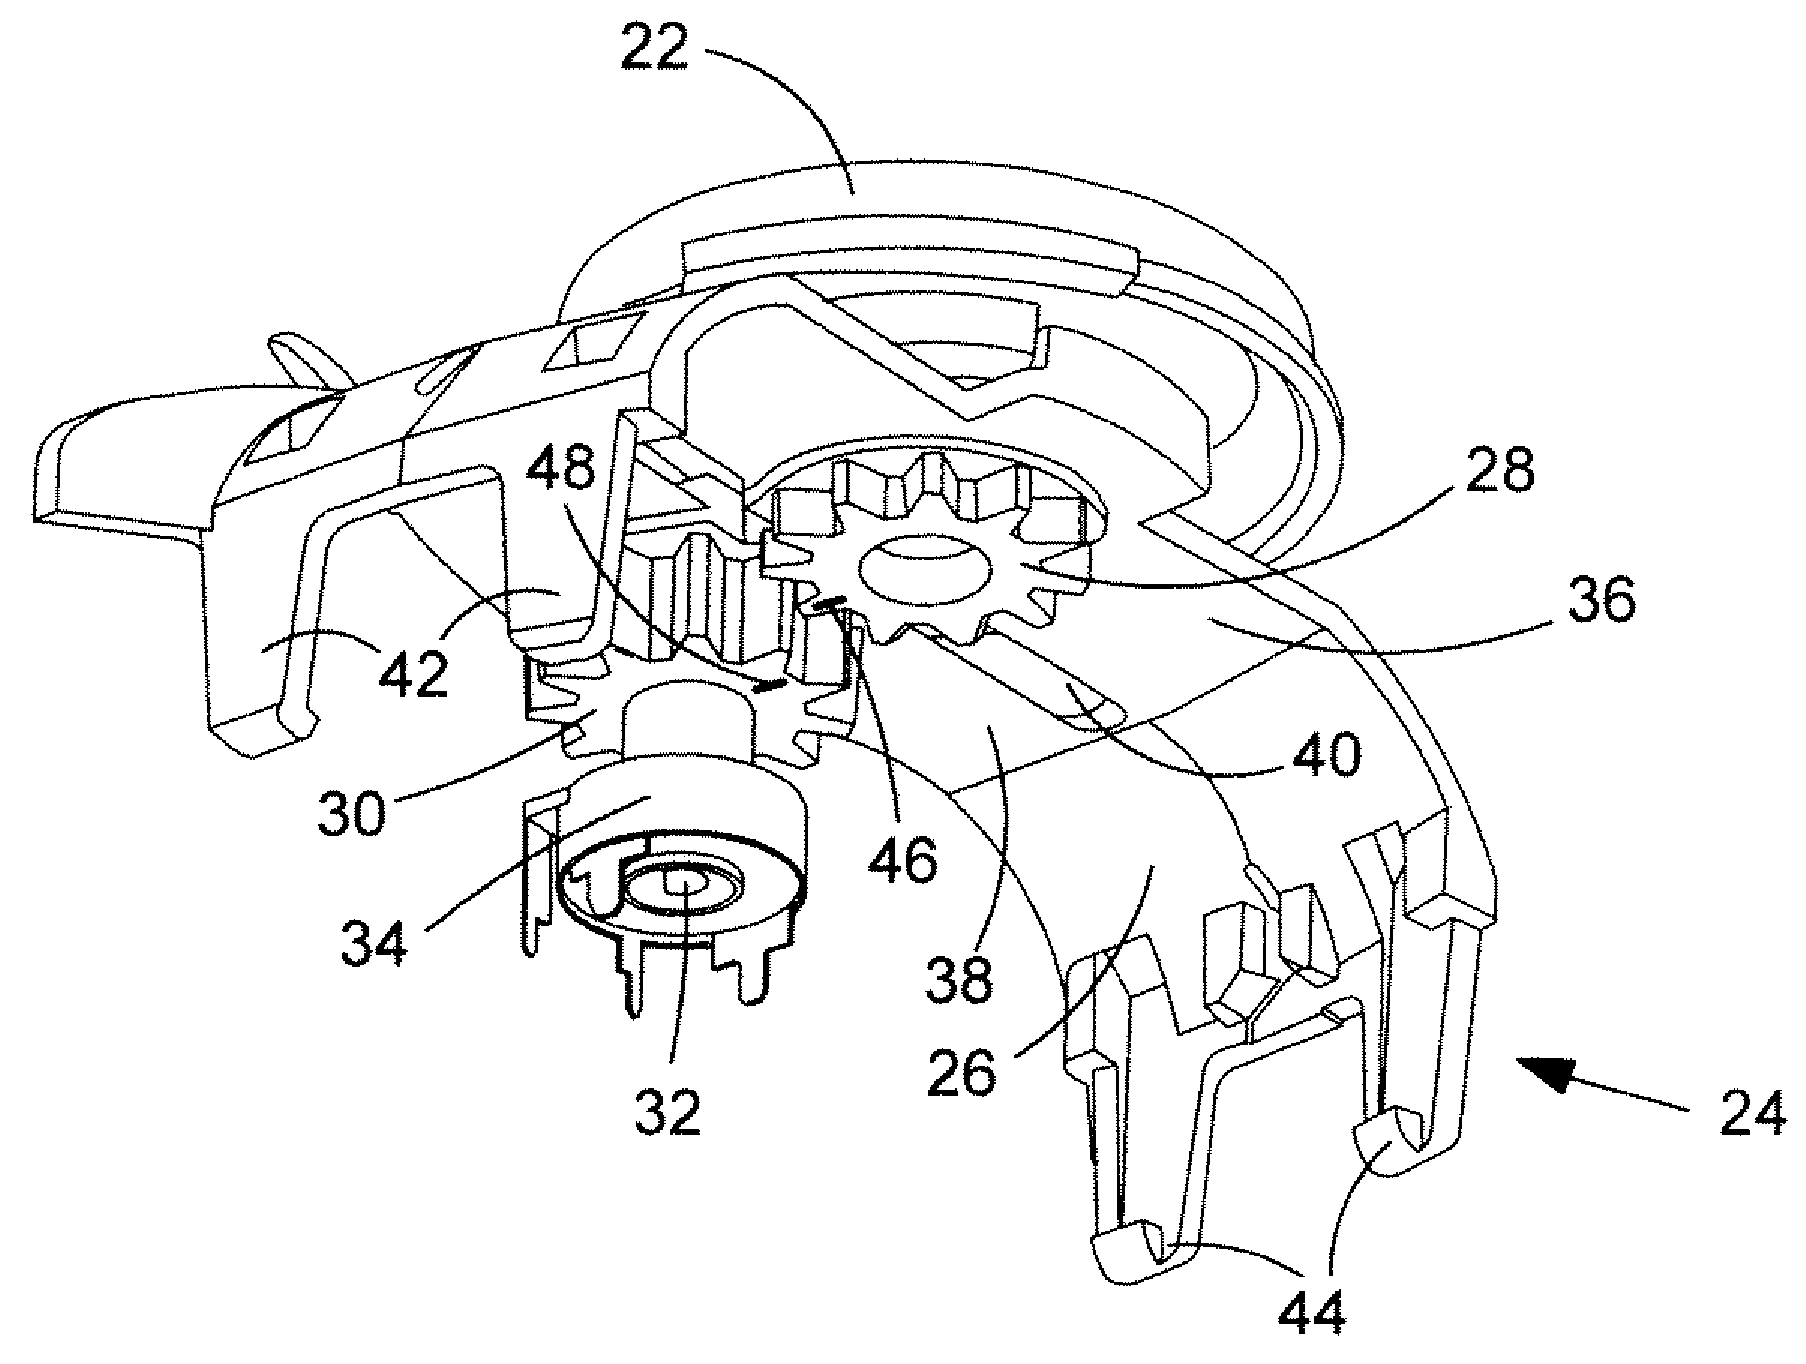 Control mechanism for a power tool